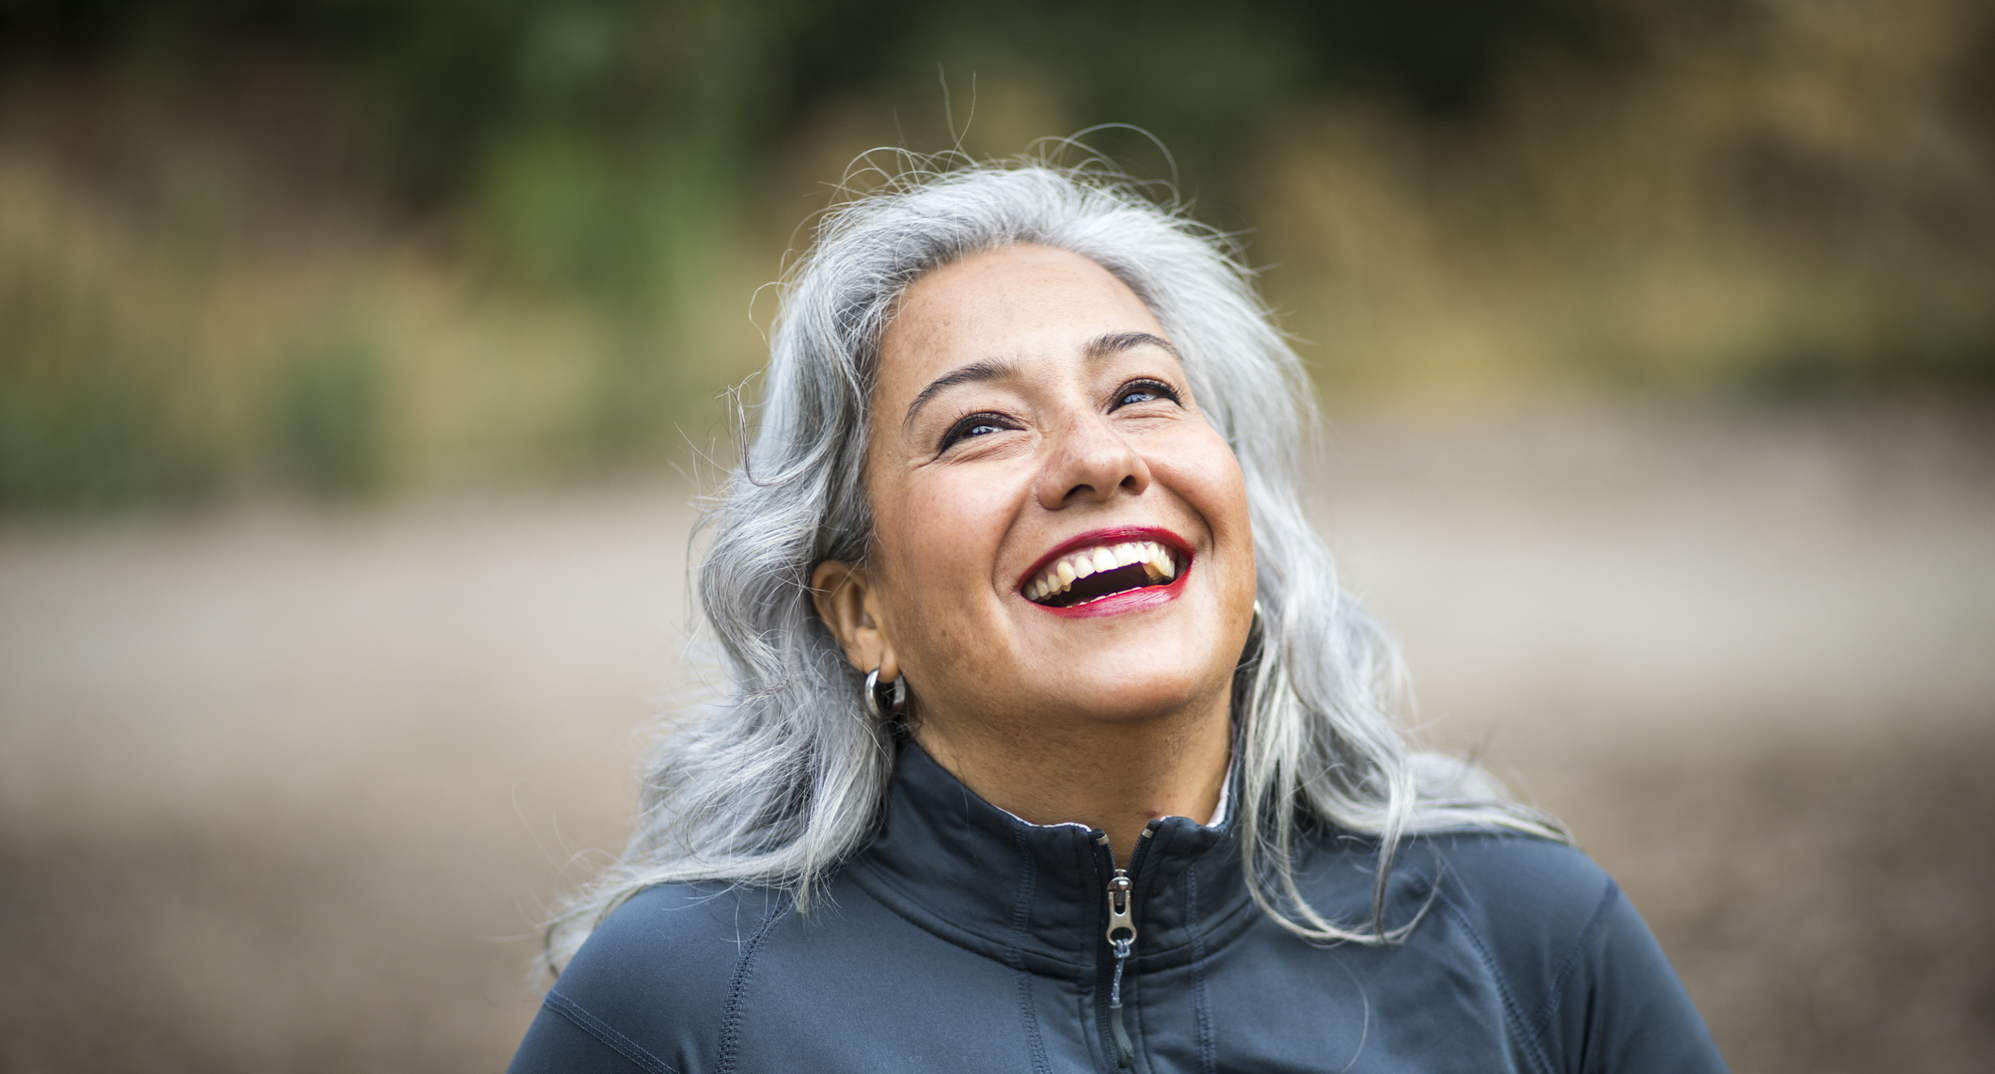 Silver-haired woman smiling